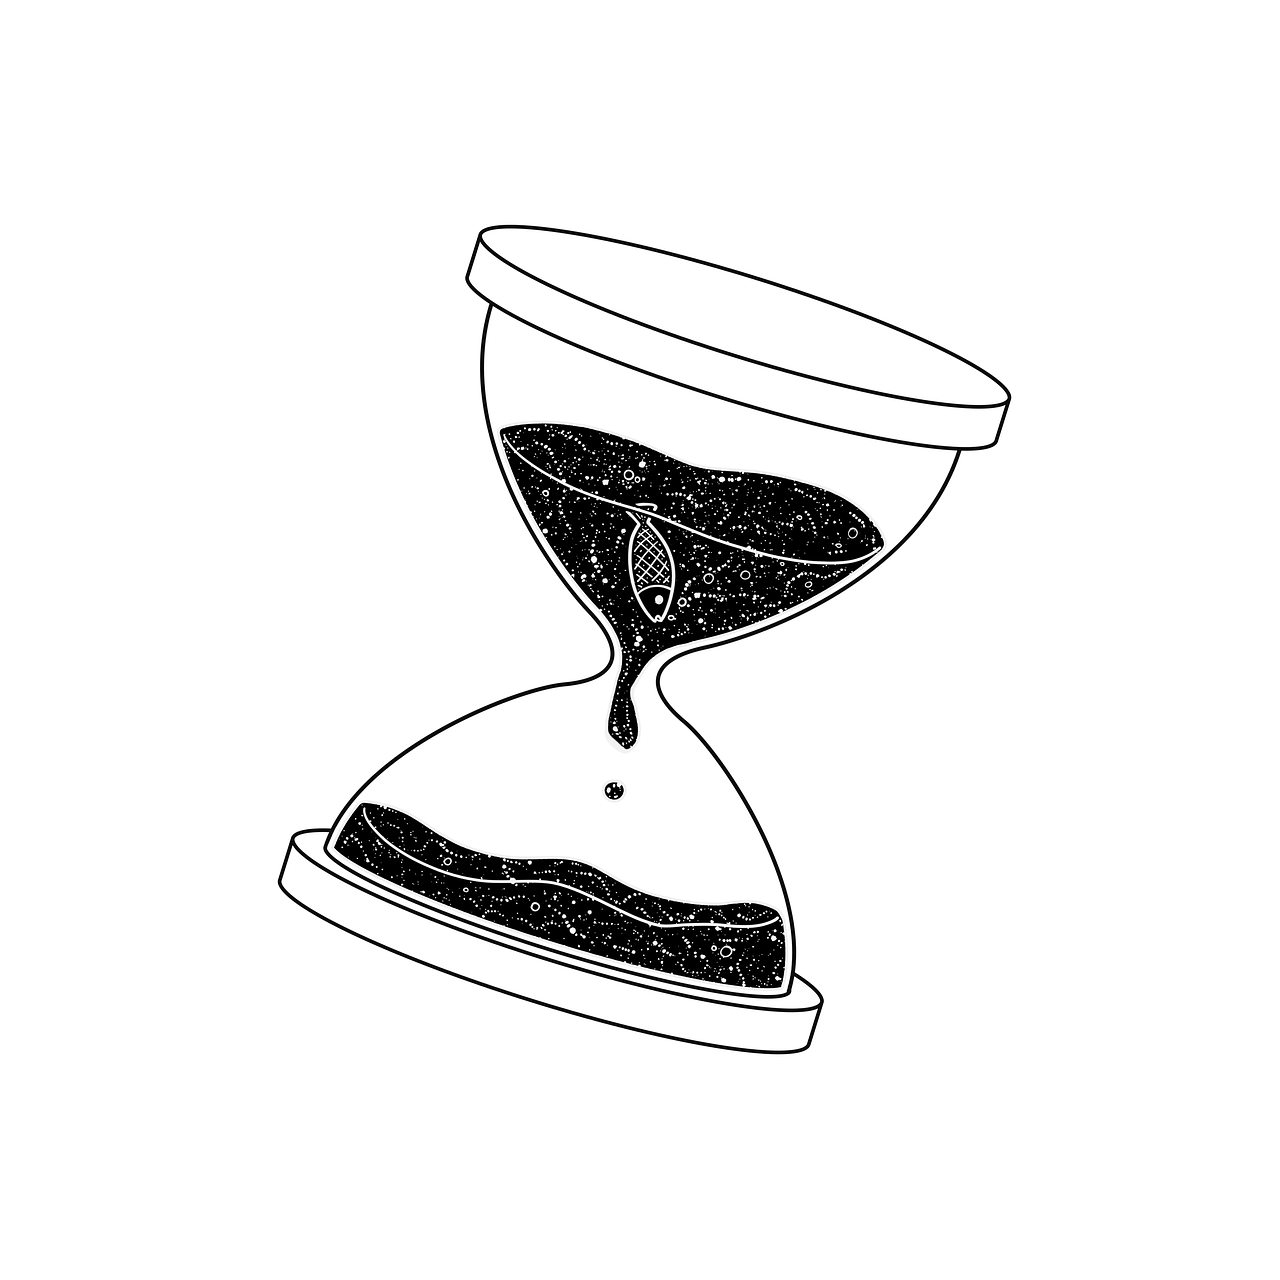 a black and white drawing of an hourglass, process art, slime, svg illustration, high quality photo, sad